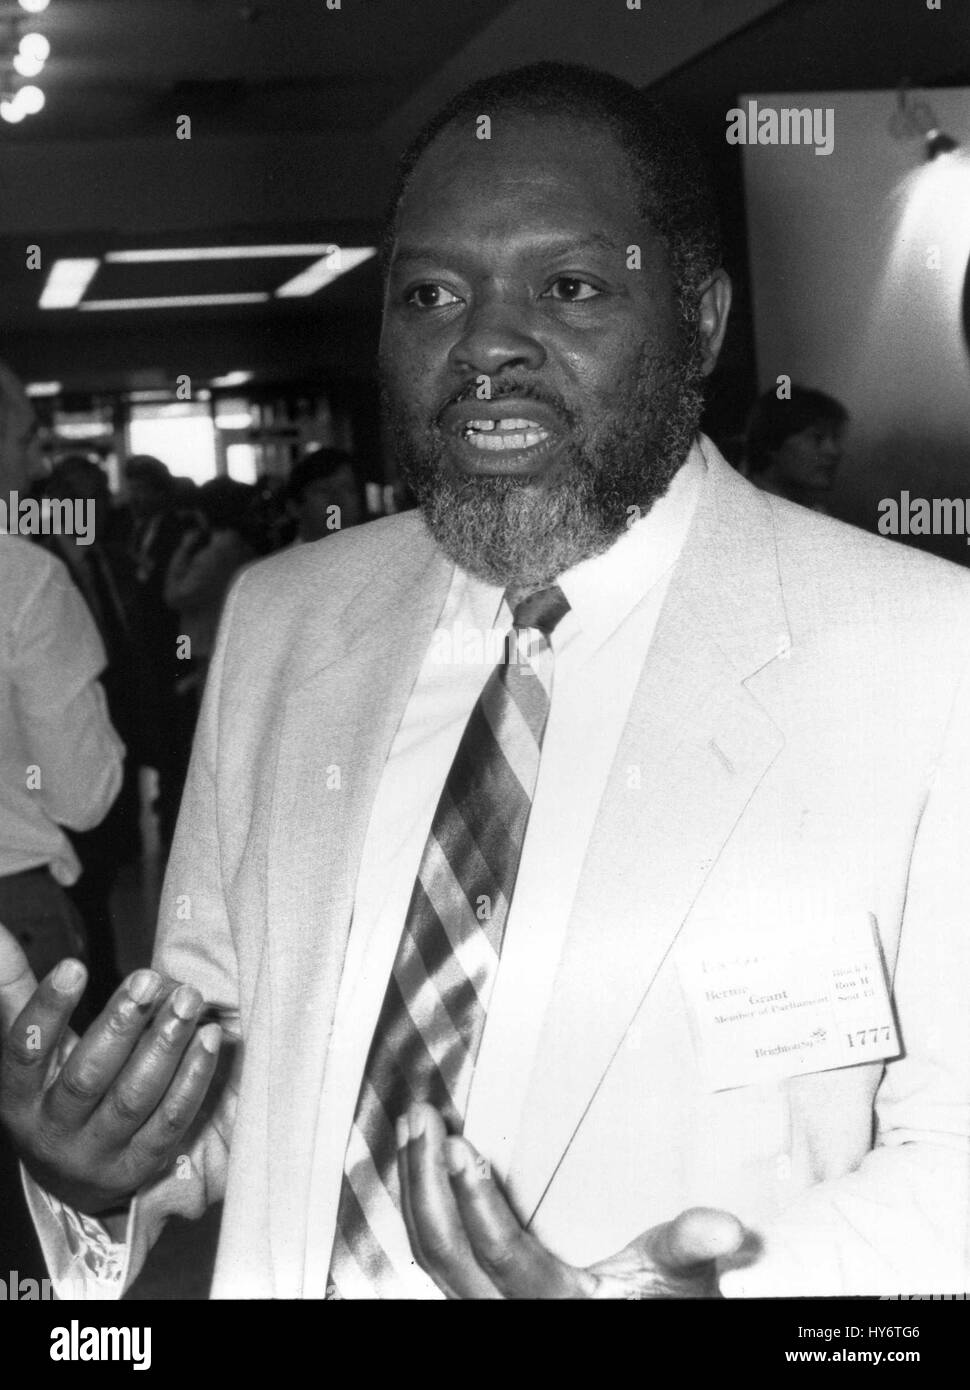 Bernie Grant, Labour party Member of Parliament for Tottenham, attends the party conference in Brighton, England on October 5, 1989. Stock Photo